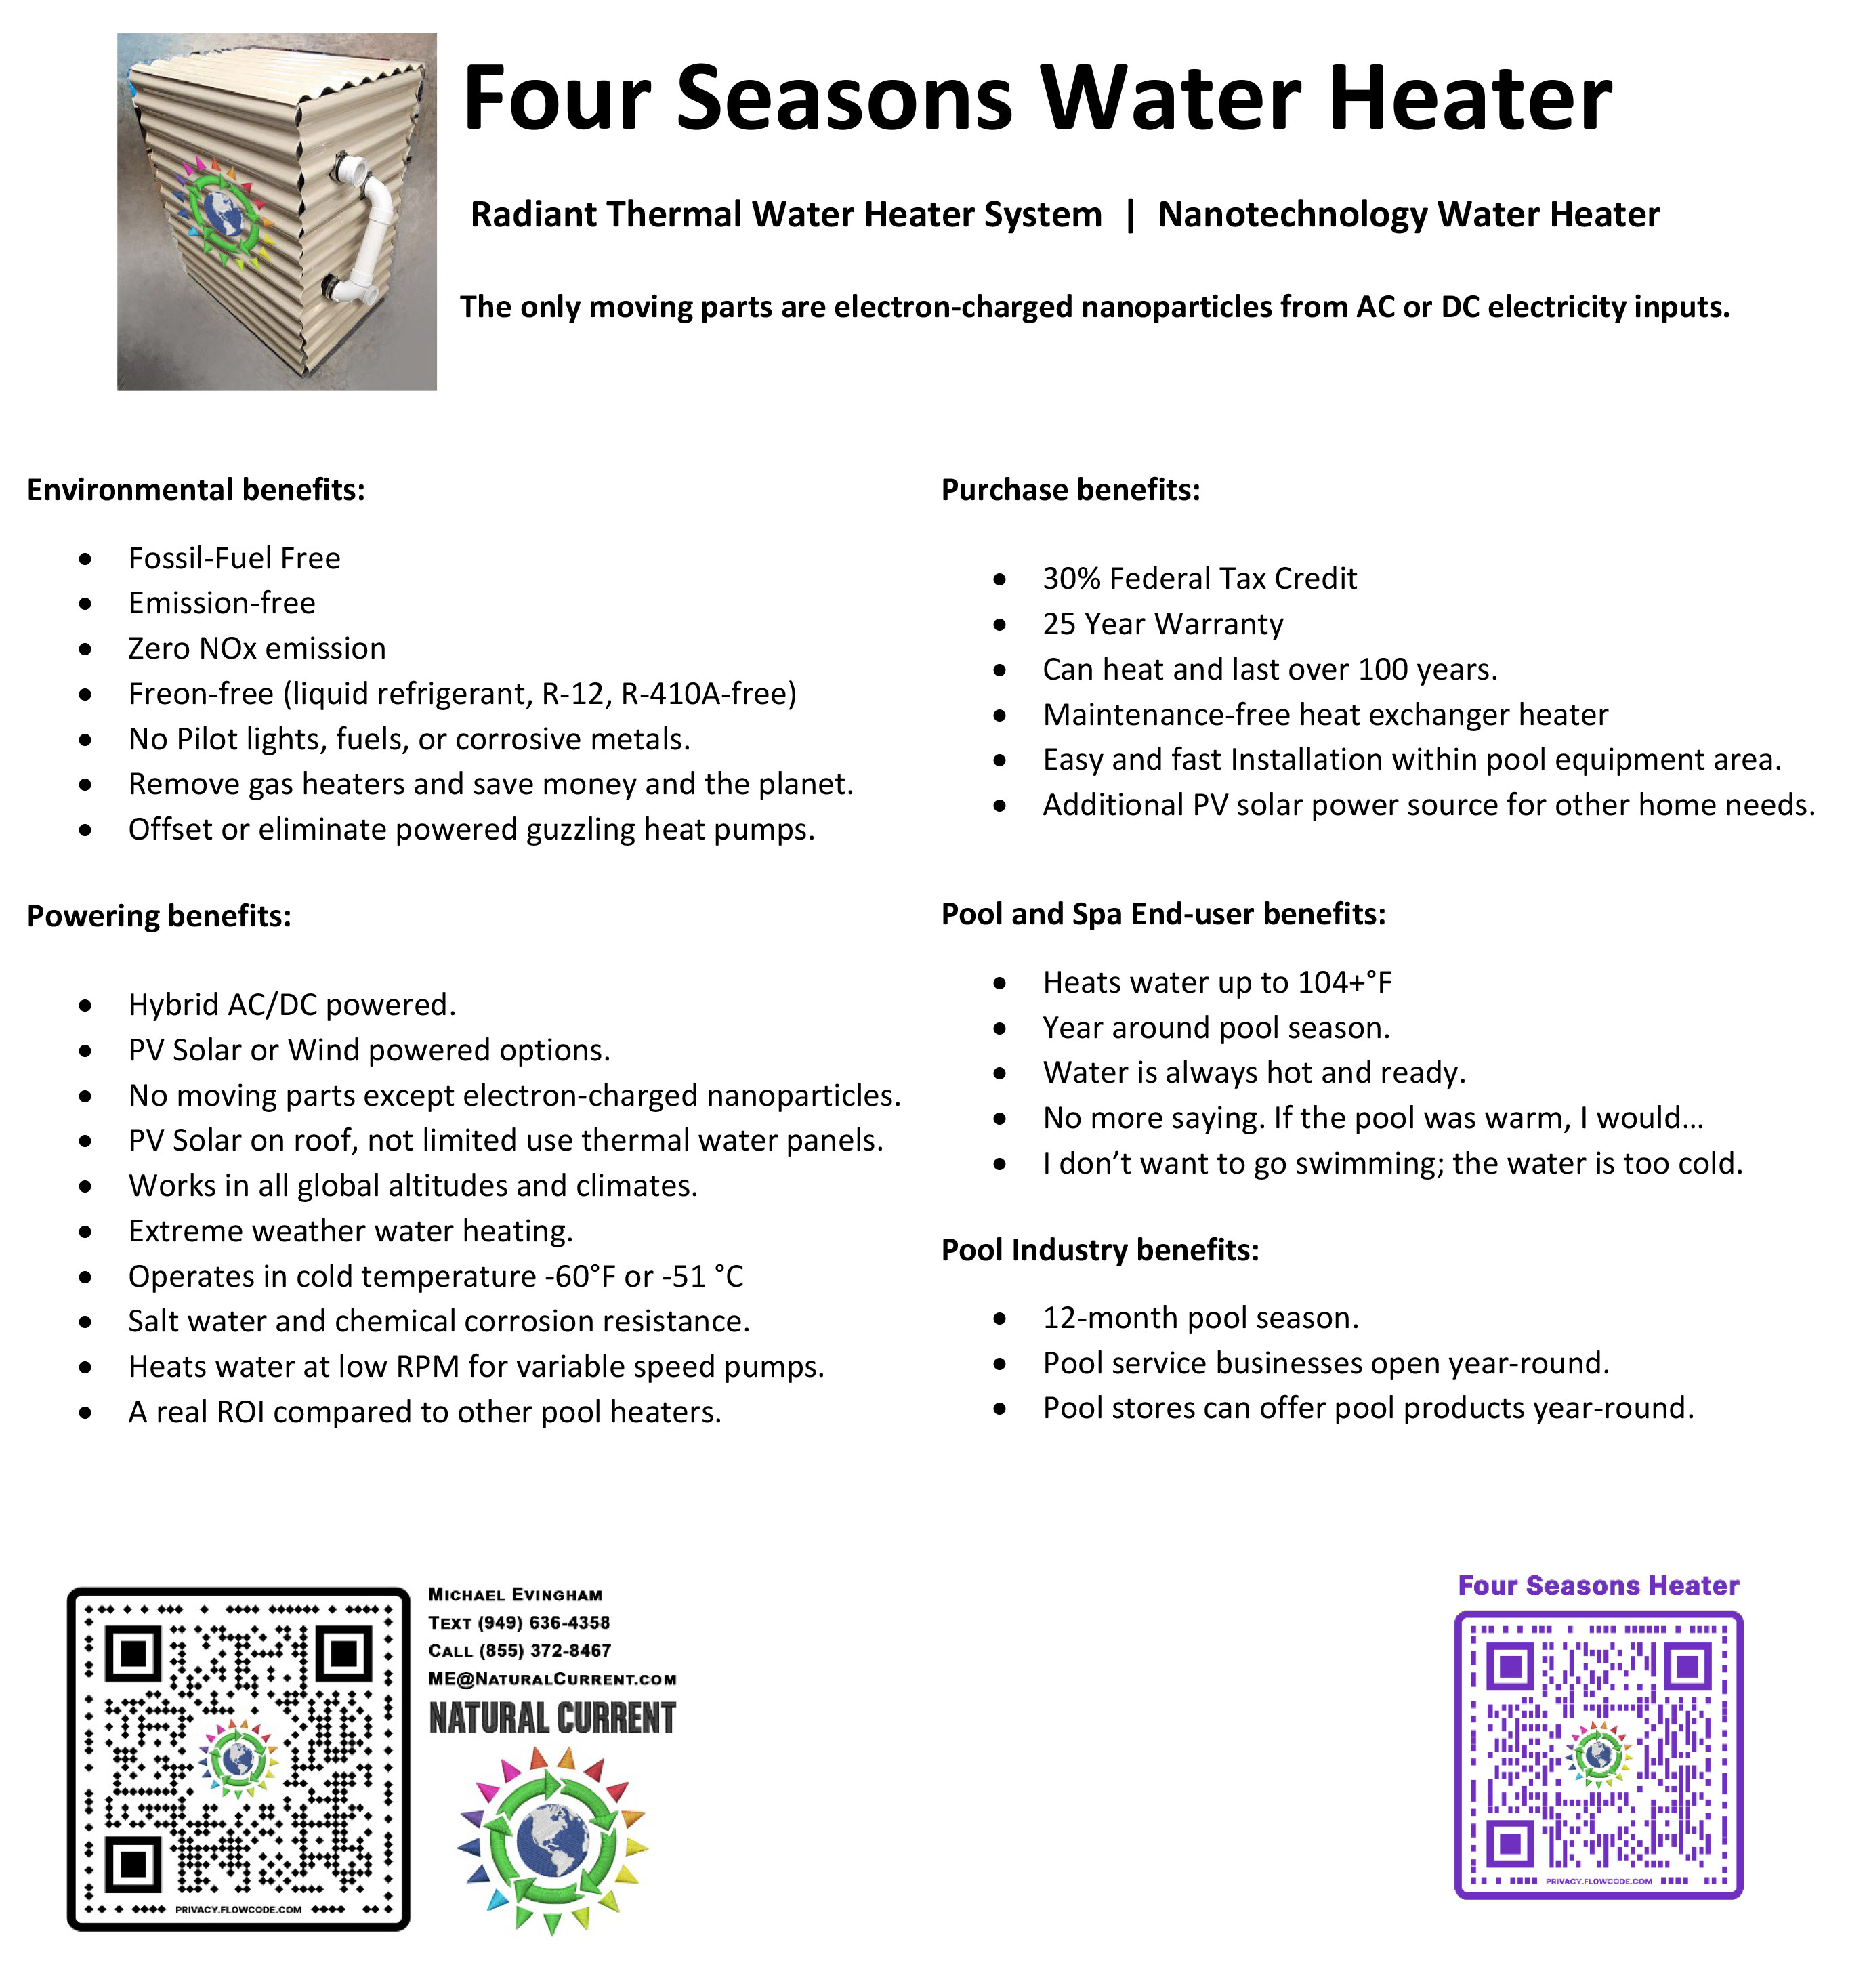 Nanoparticle Water Heater - Natural Current - Michael Evingham